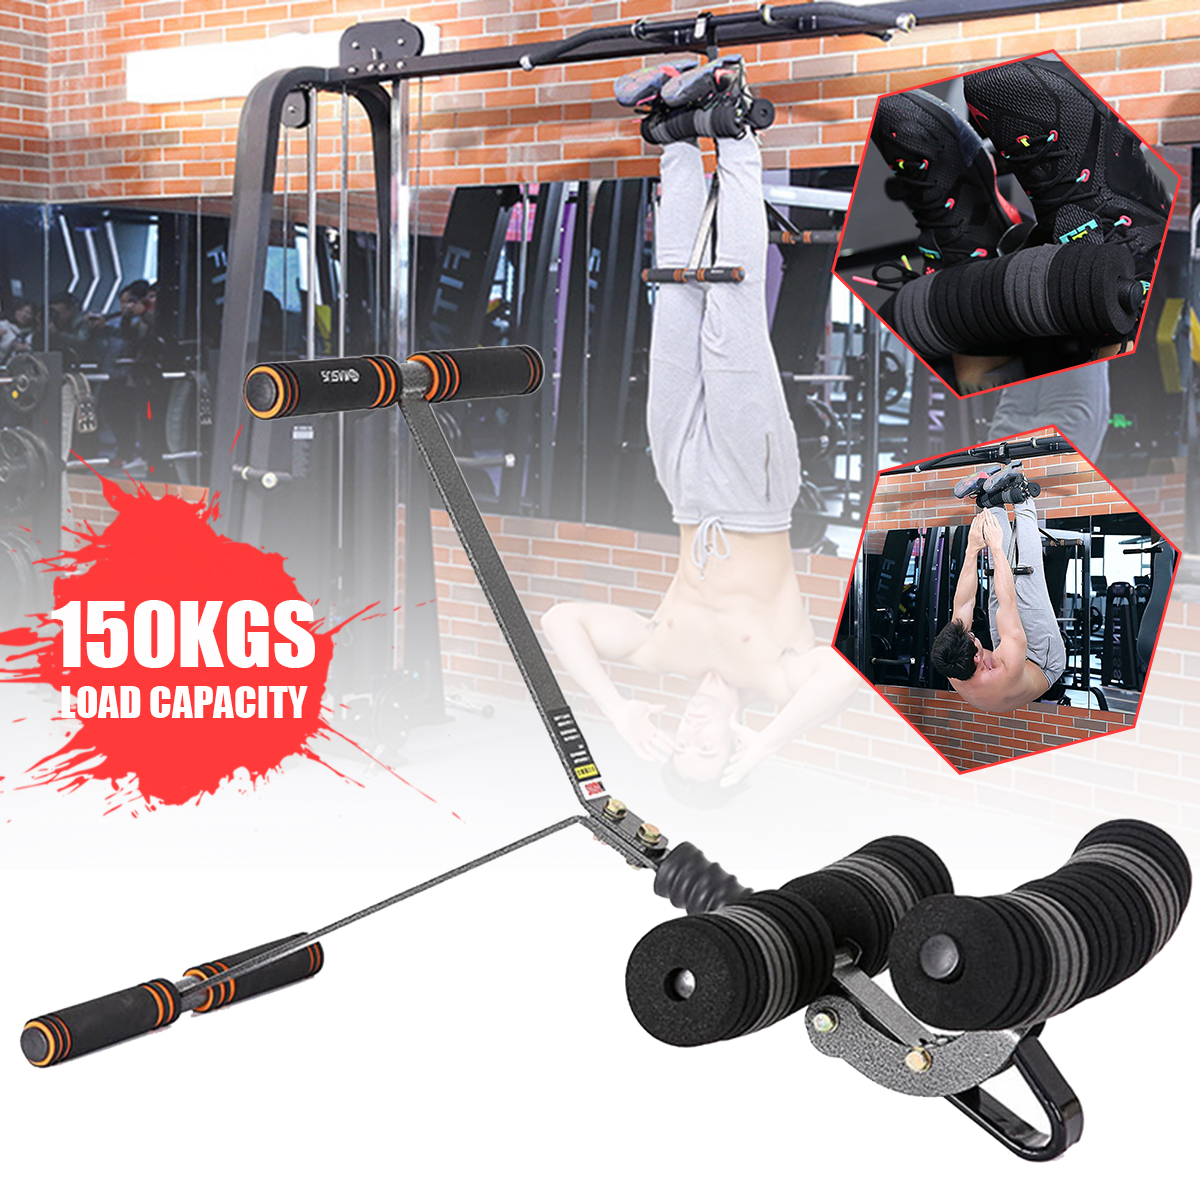 Handstand-Machine-Inversion-Device-Fitness-Equipment-Abdominal-Traning-Fiteness-Exercise-Tools-1688238-1